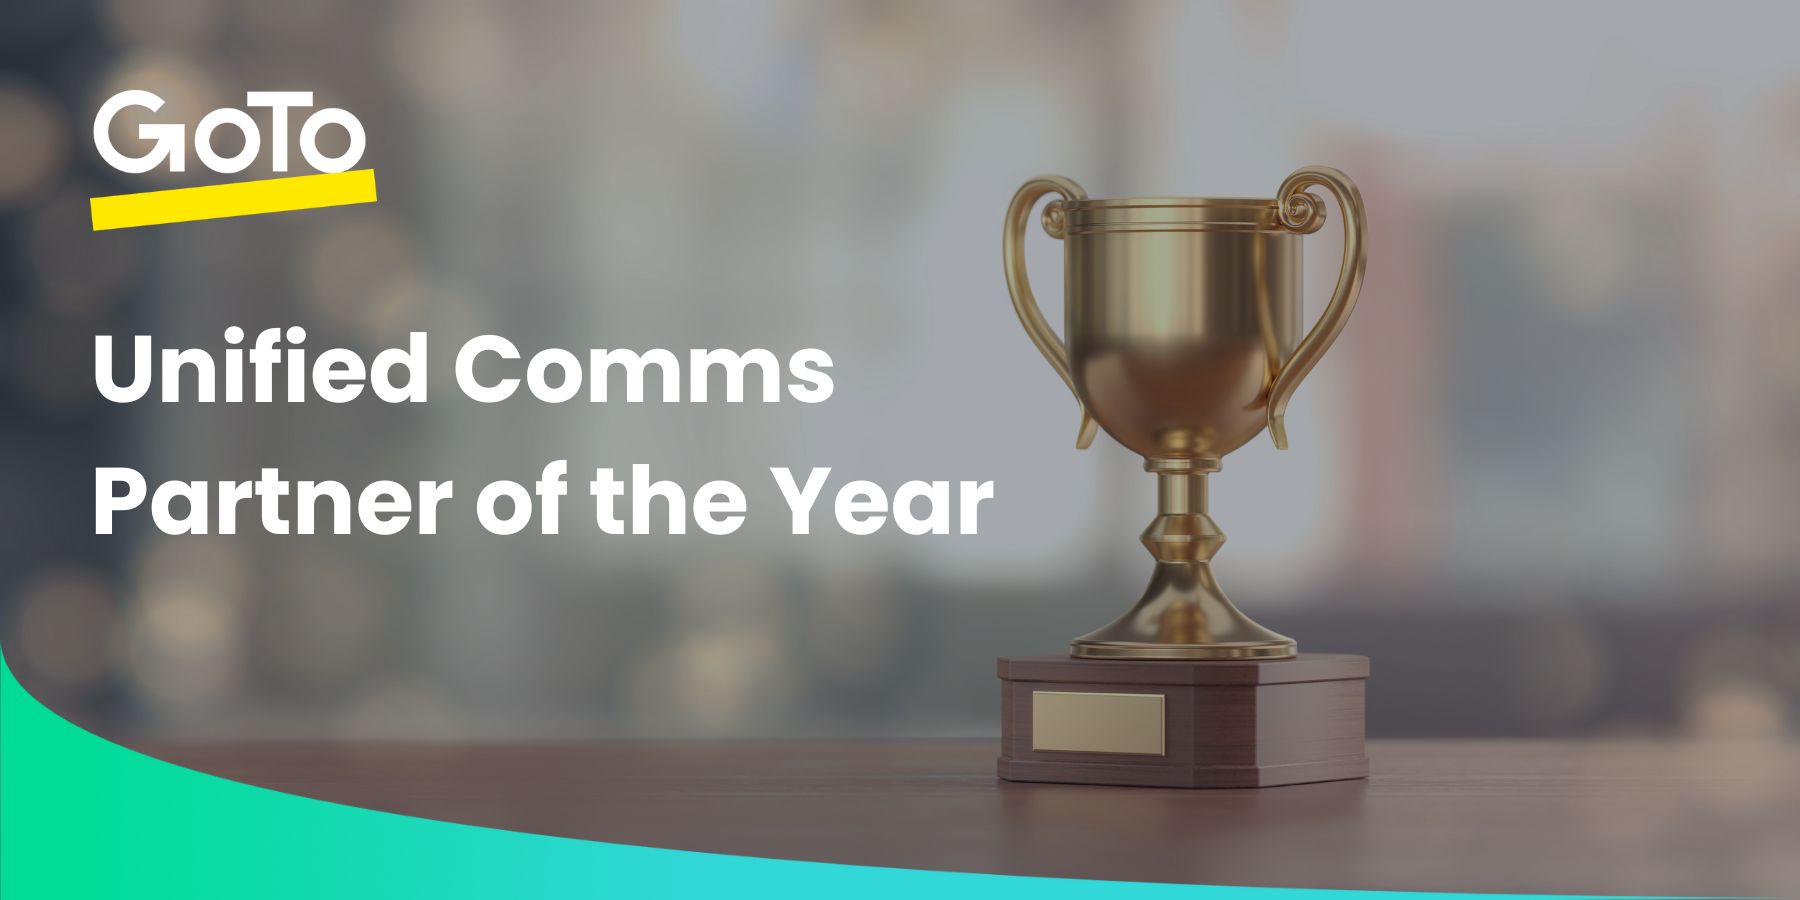 Unified Comms Partner of the Year Award